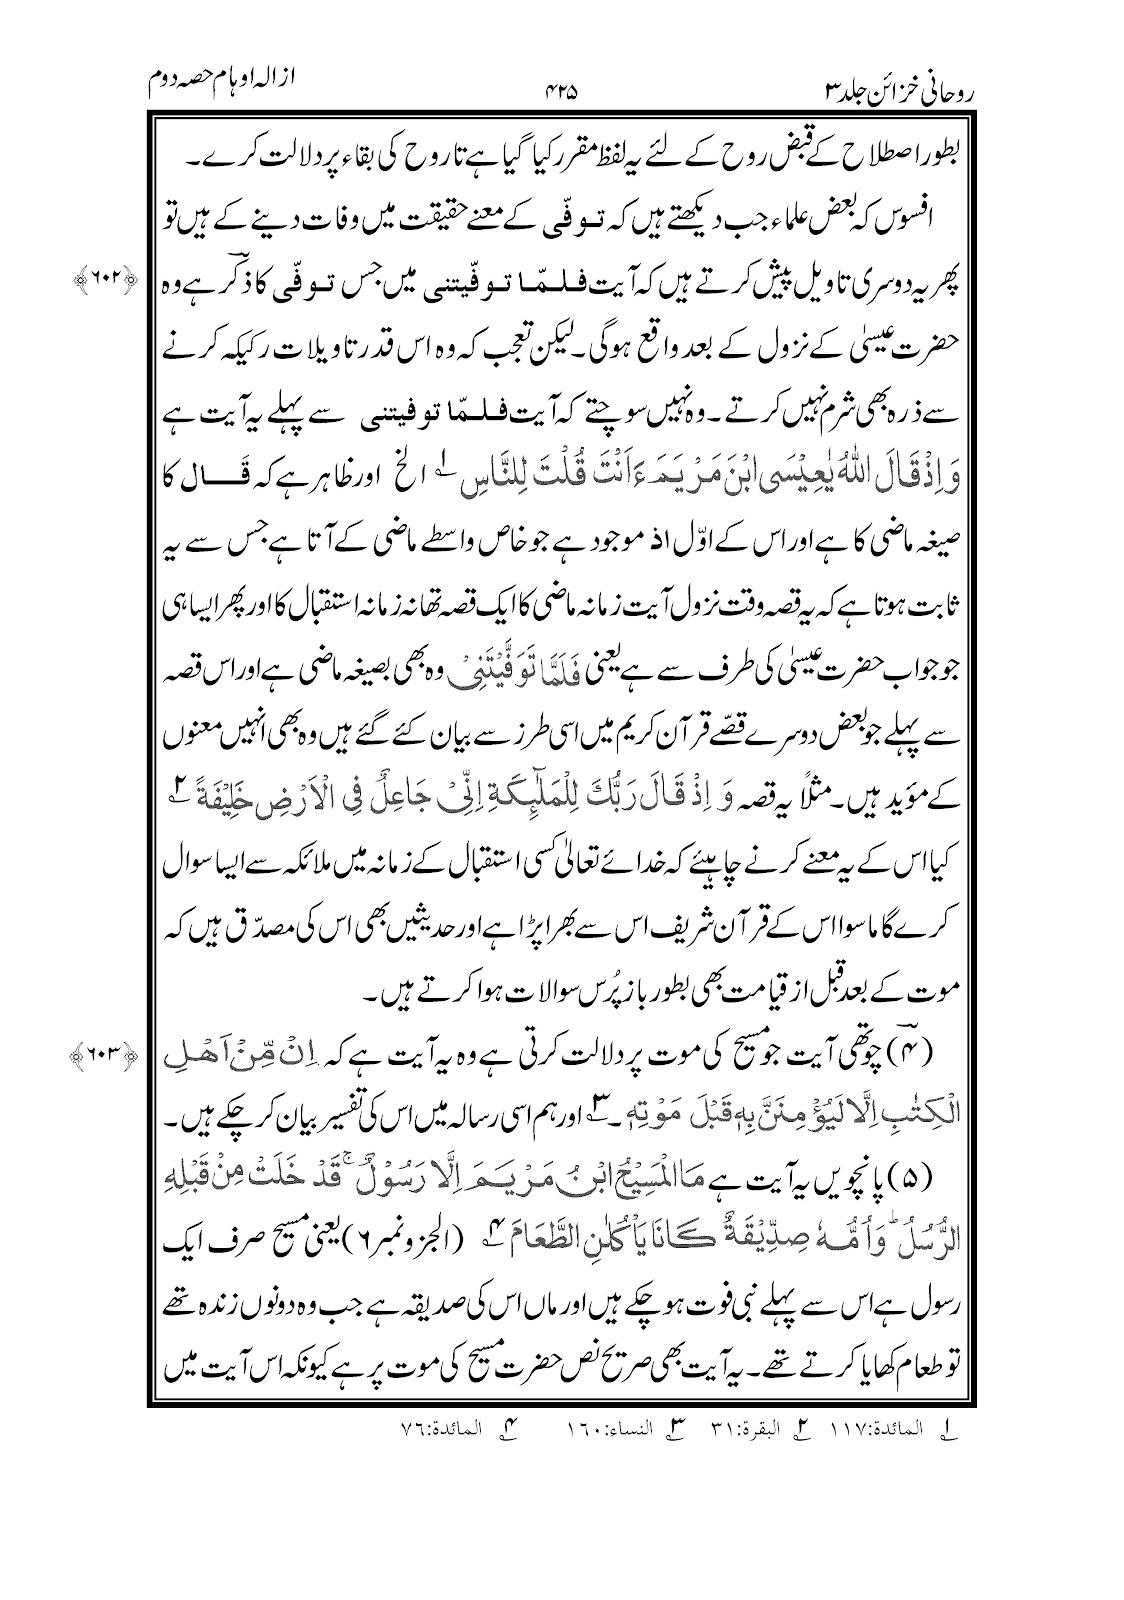 In Urdu : 30 Verses from Holy Quran that proves the death of Isa (as)